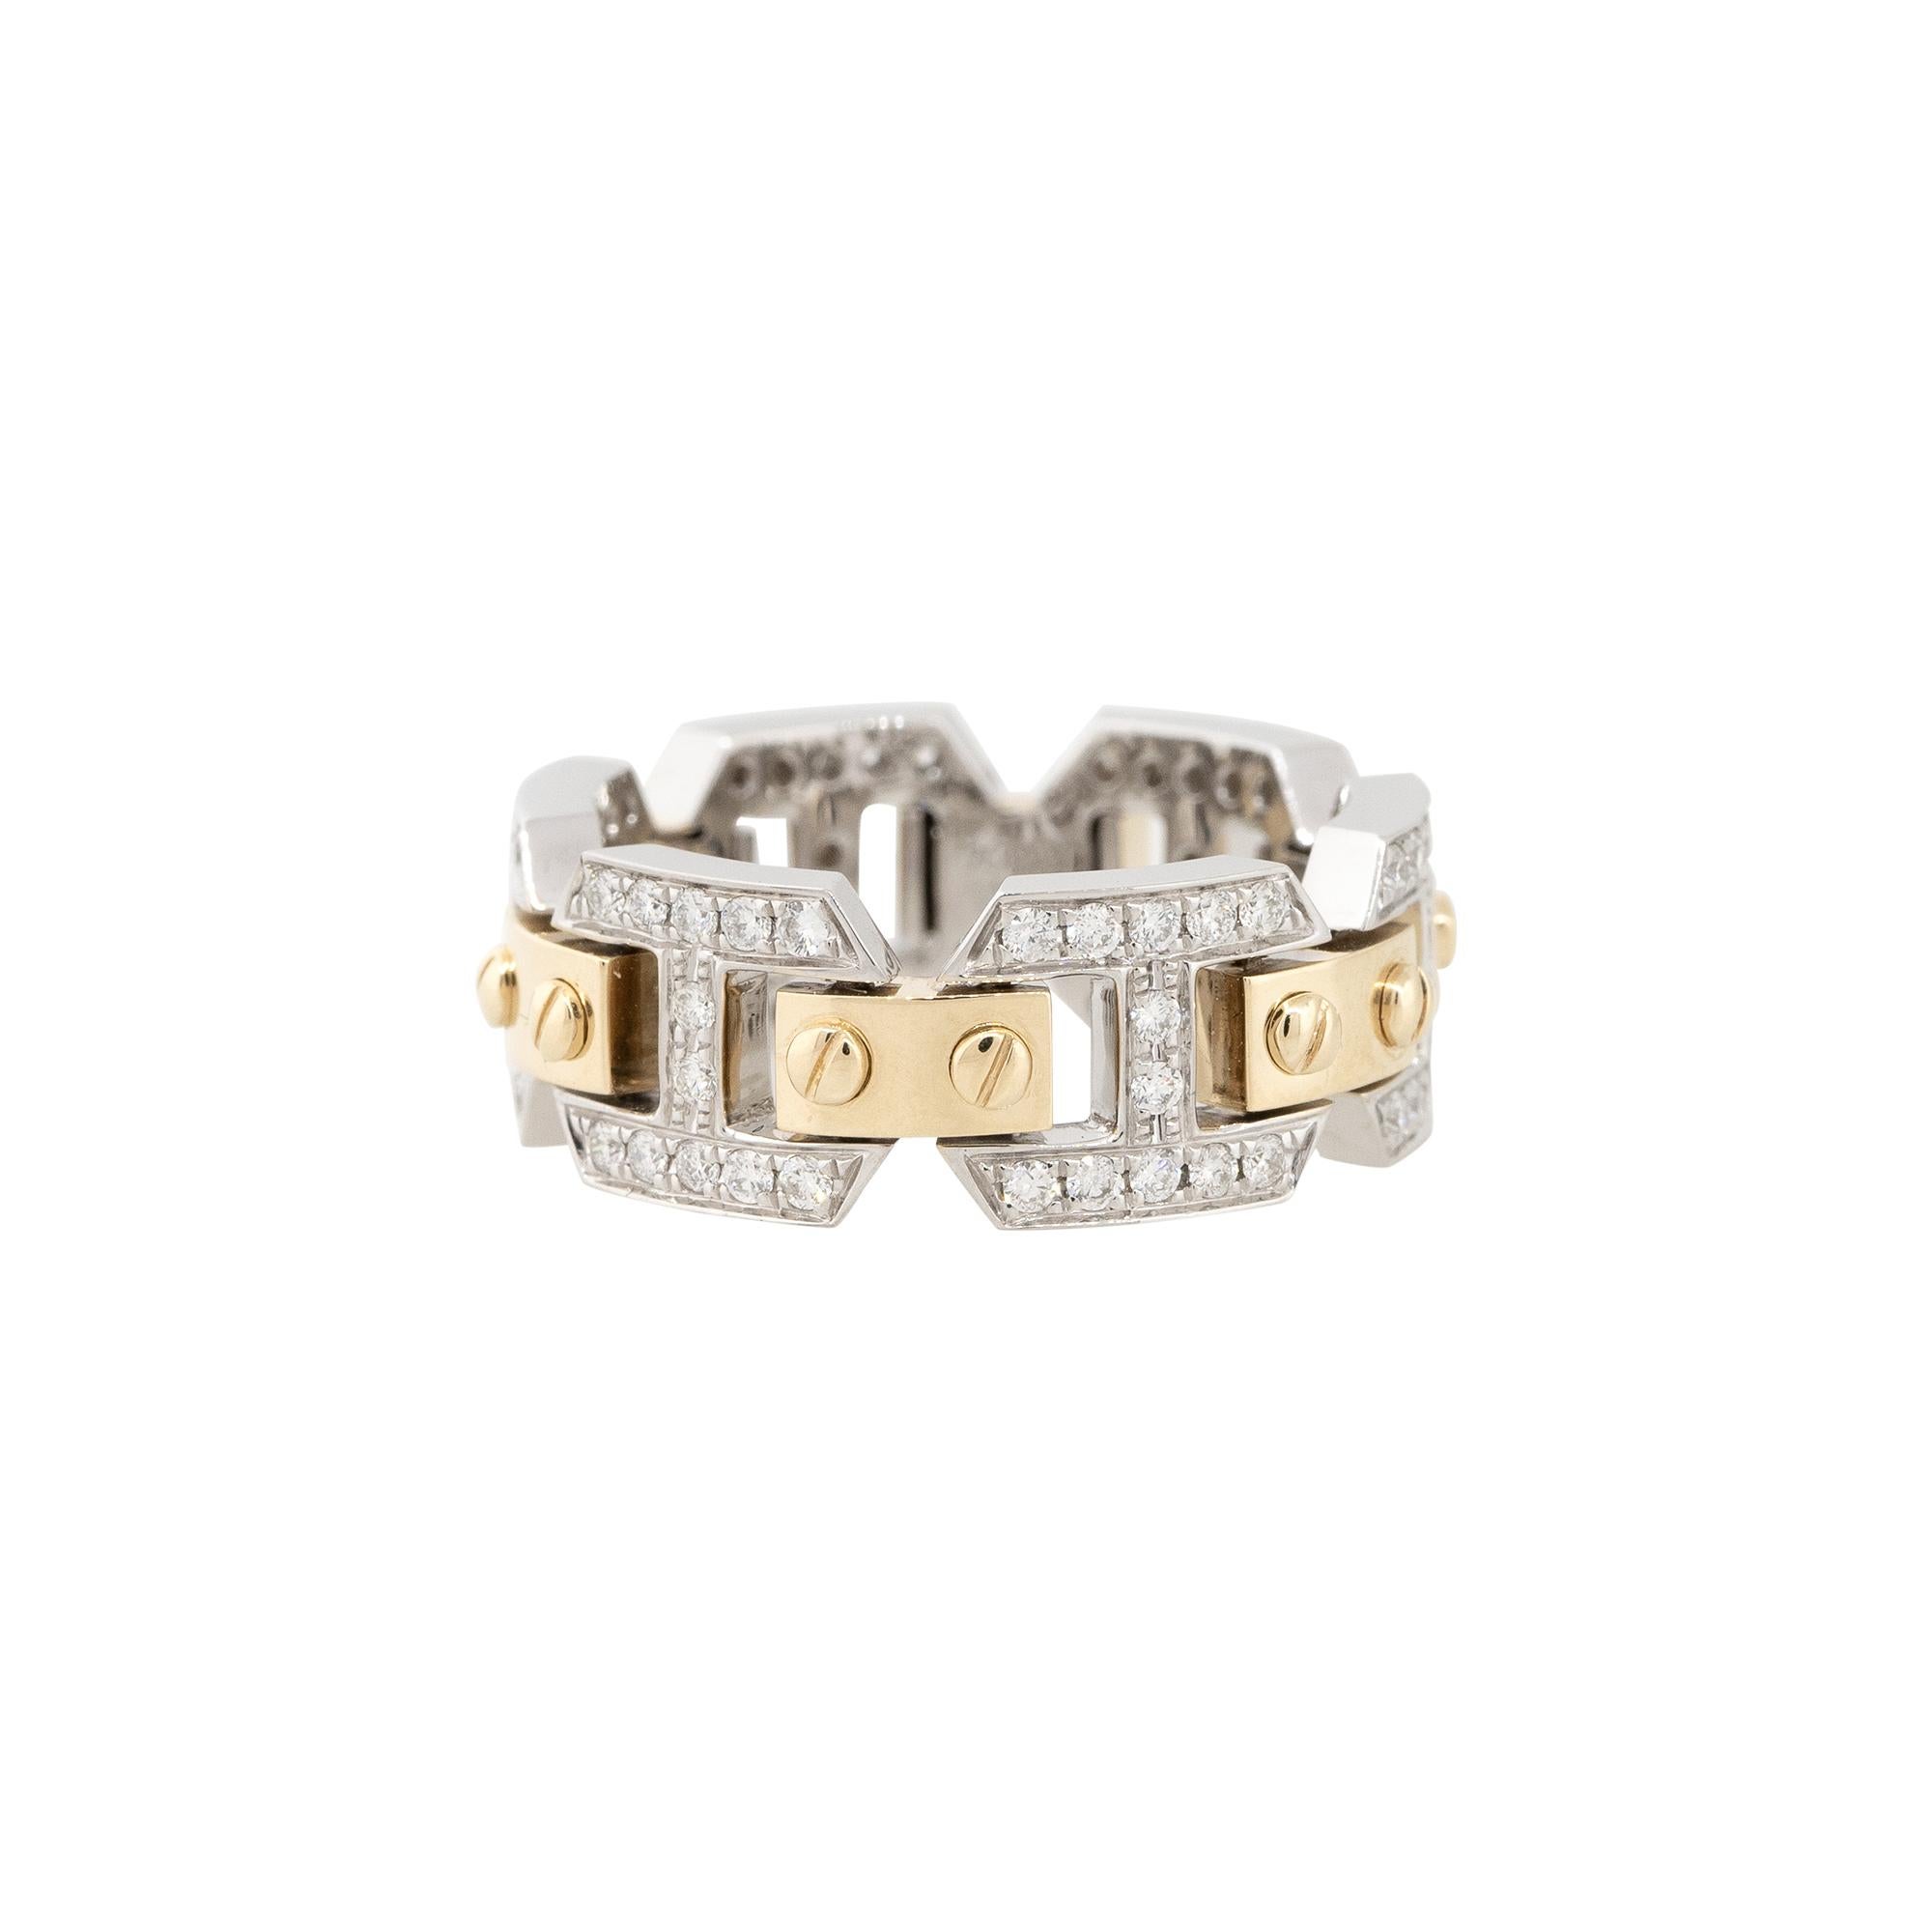 18k White and Yellow Gold 0.71ctw Pave Diamond Link Band
Style: Women's Diamond Link Band
Material: 18k White Gold and 18k Yellow Gold
Main Diamond Details: Approximately 0.71ctw of Round Brilliant cut Diamonds
Ring Size: 6.5 (Cannot be sized)
Item